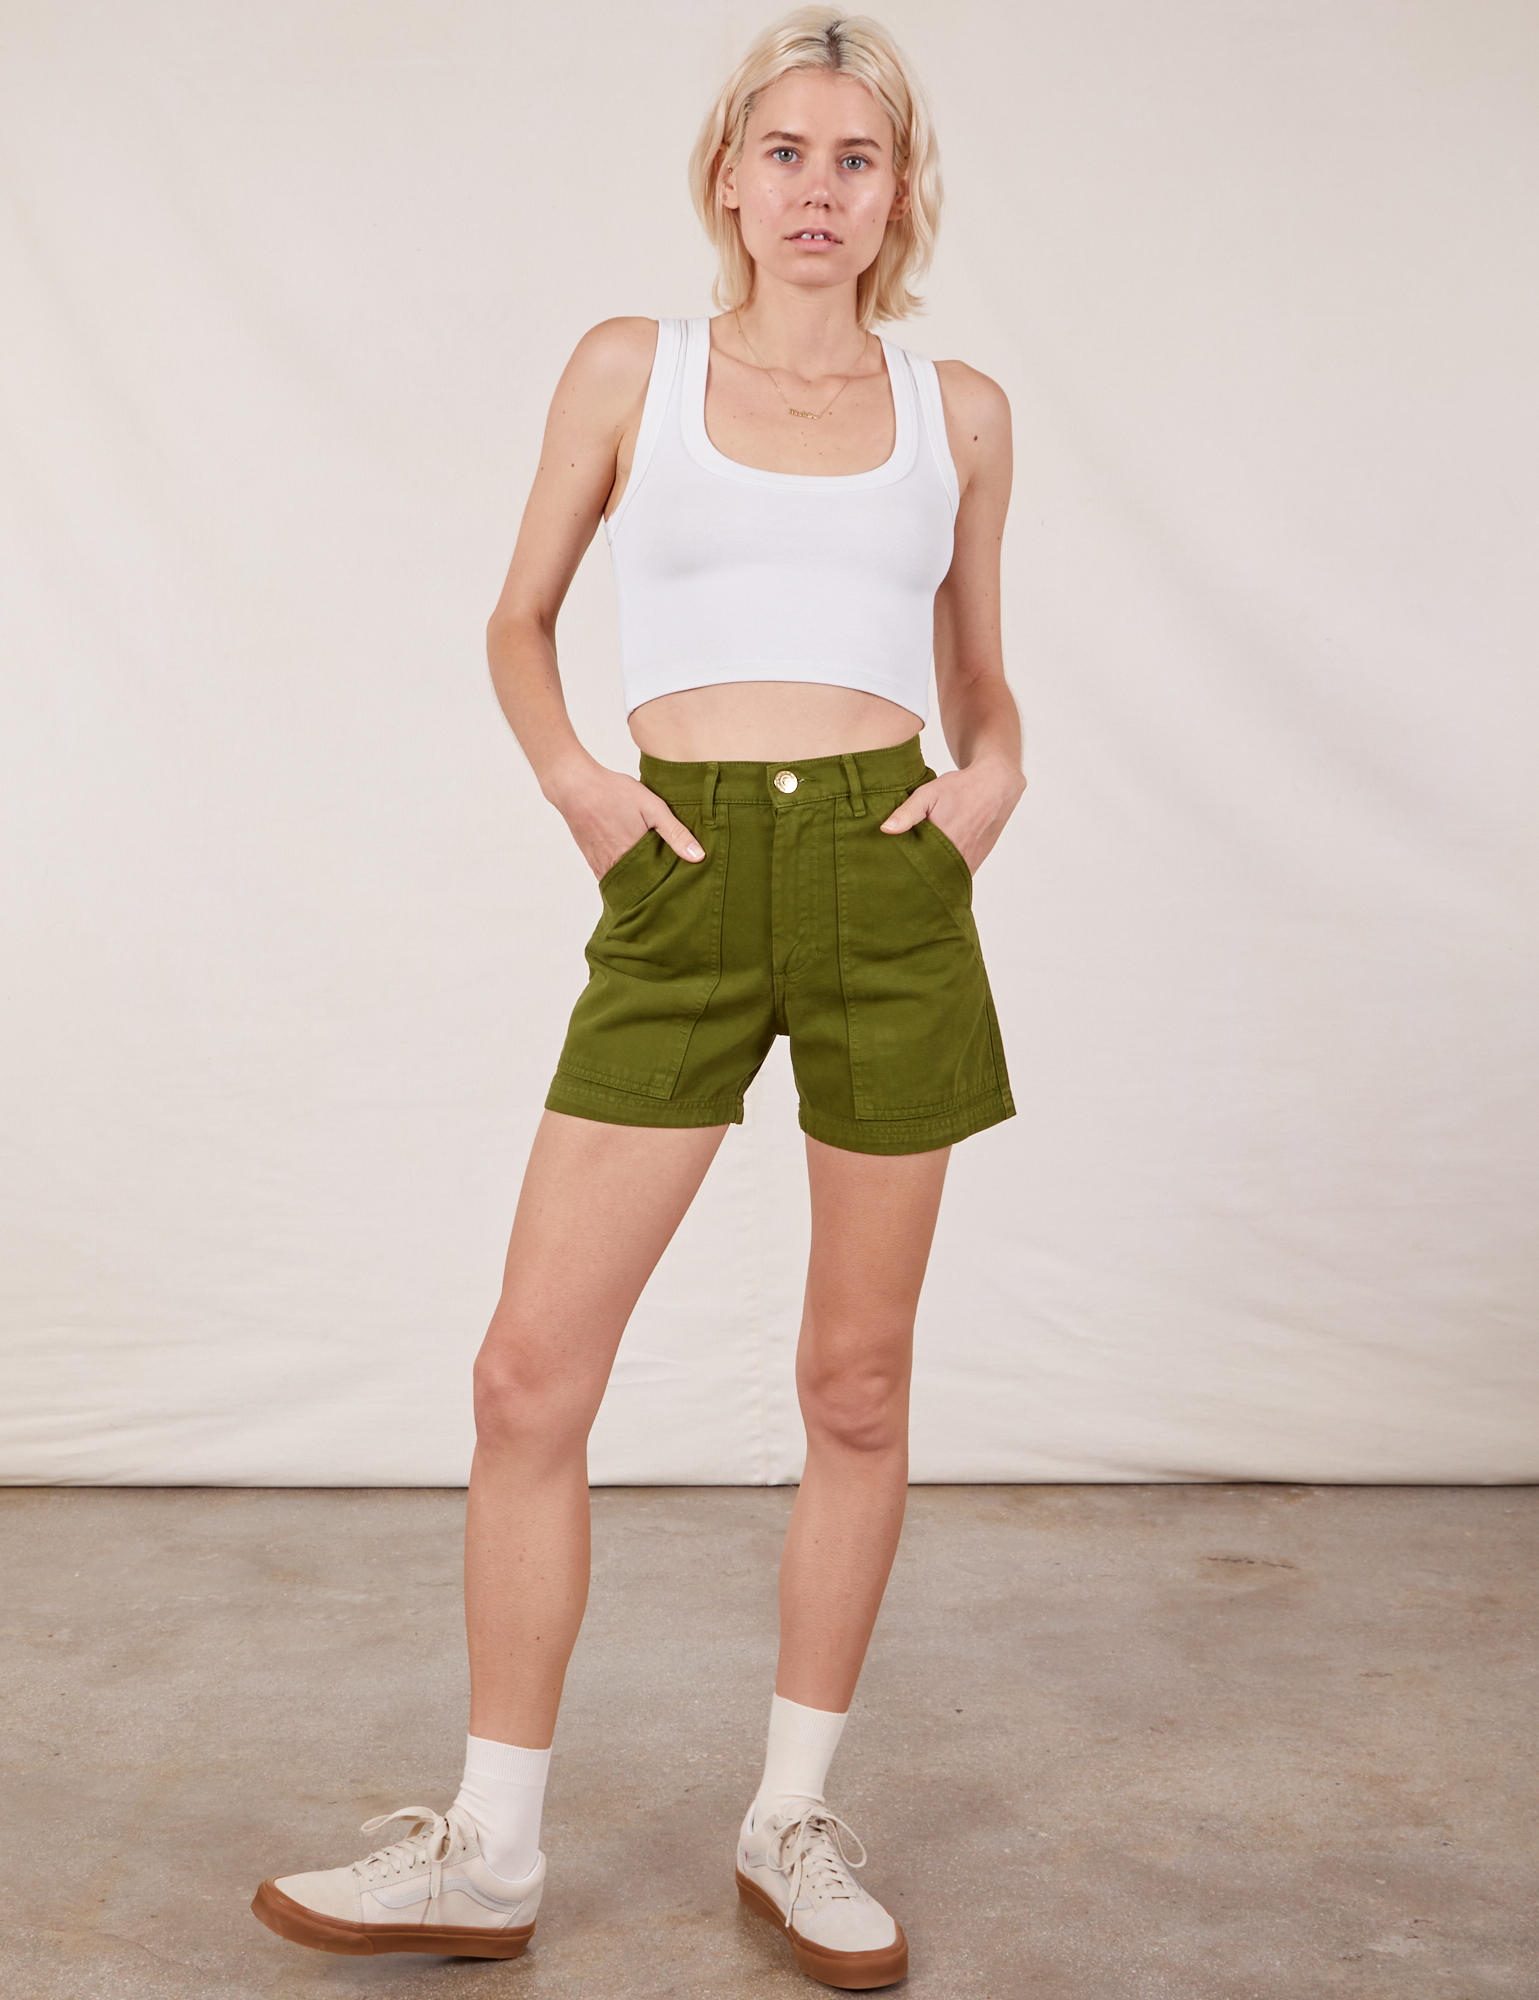 Madeline is 5’9” and wearing XXS Classic Work Shorts in Summer Olive paired with a Cropped Tank Top in vintage tee off-white